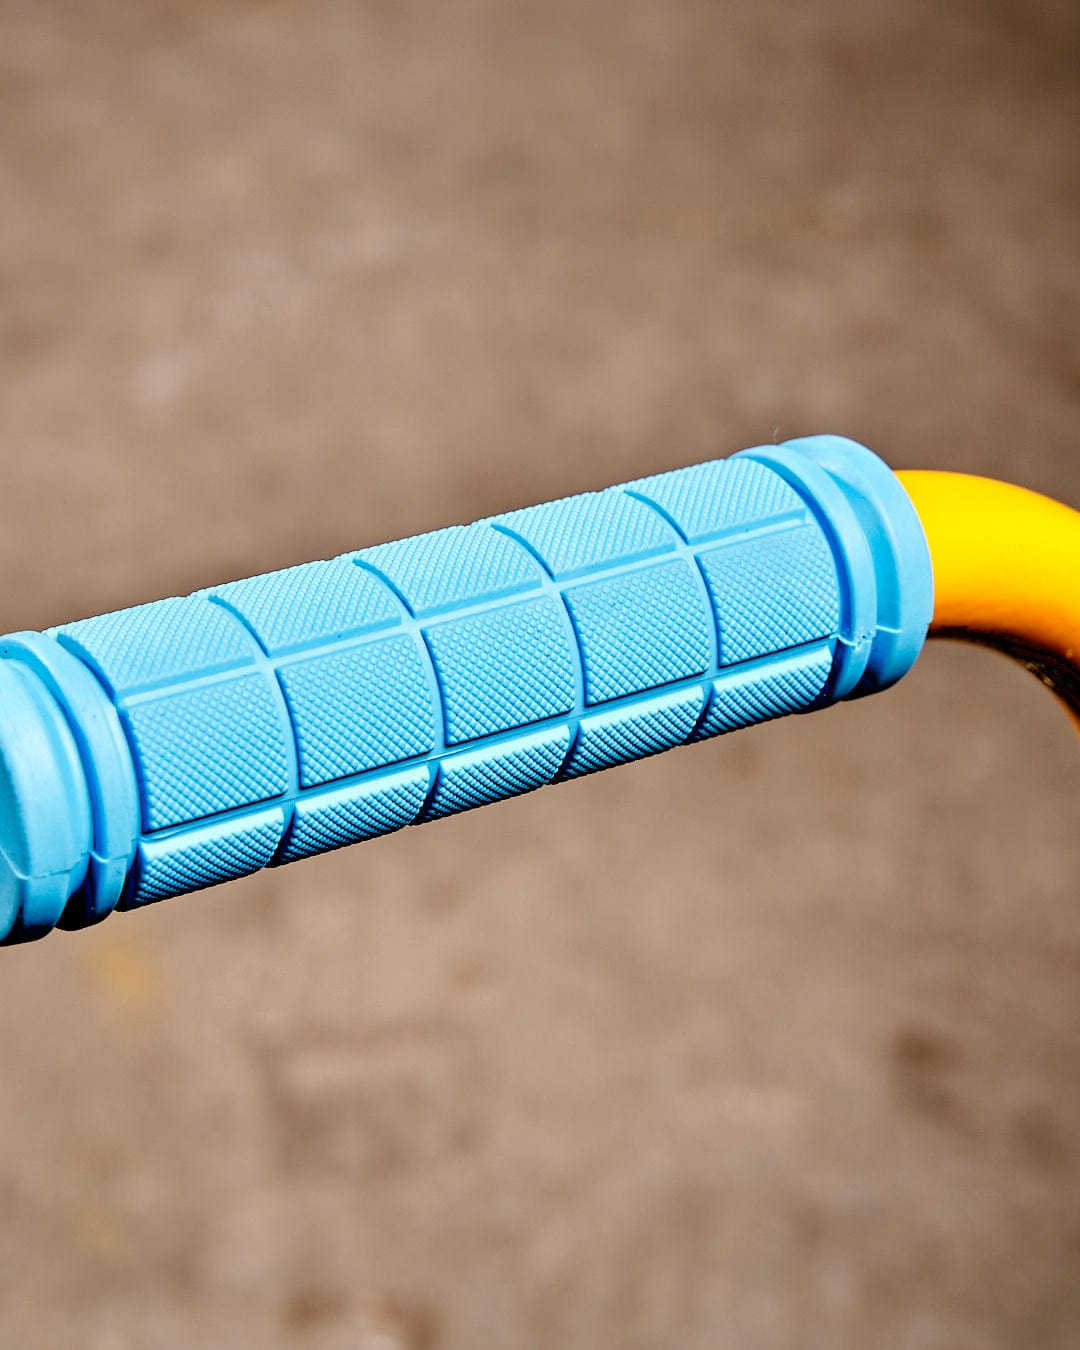 A close up of a Saltrock Warped - Stunt Scooter - Blue handle on a bicycle.